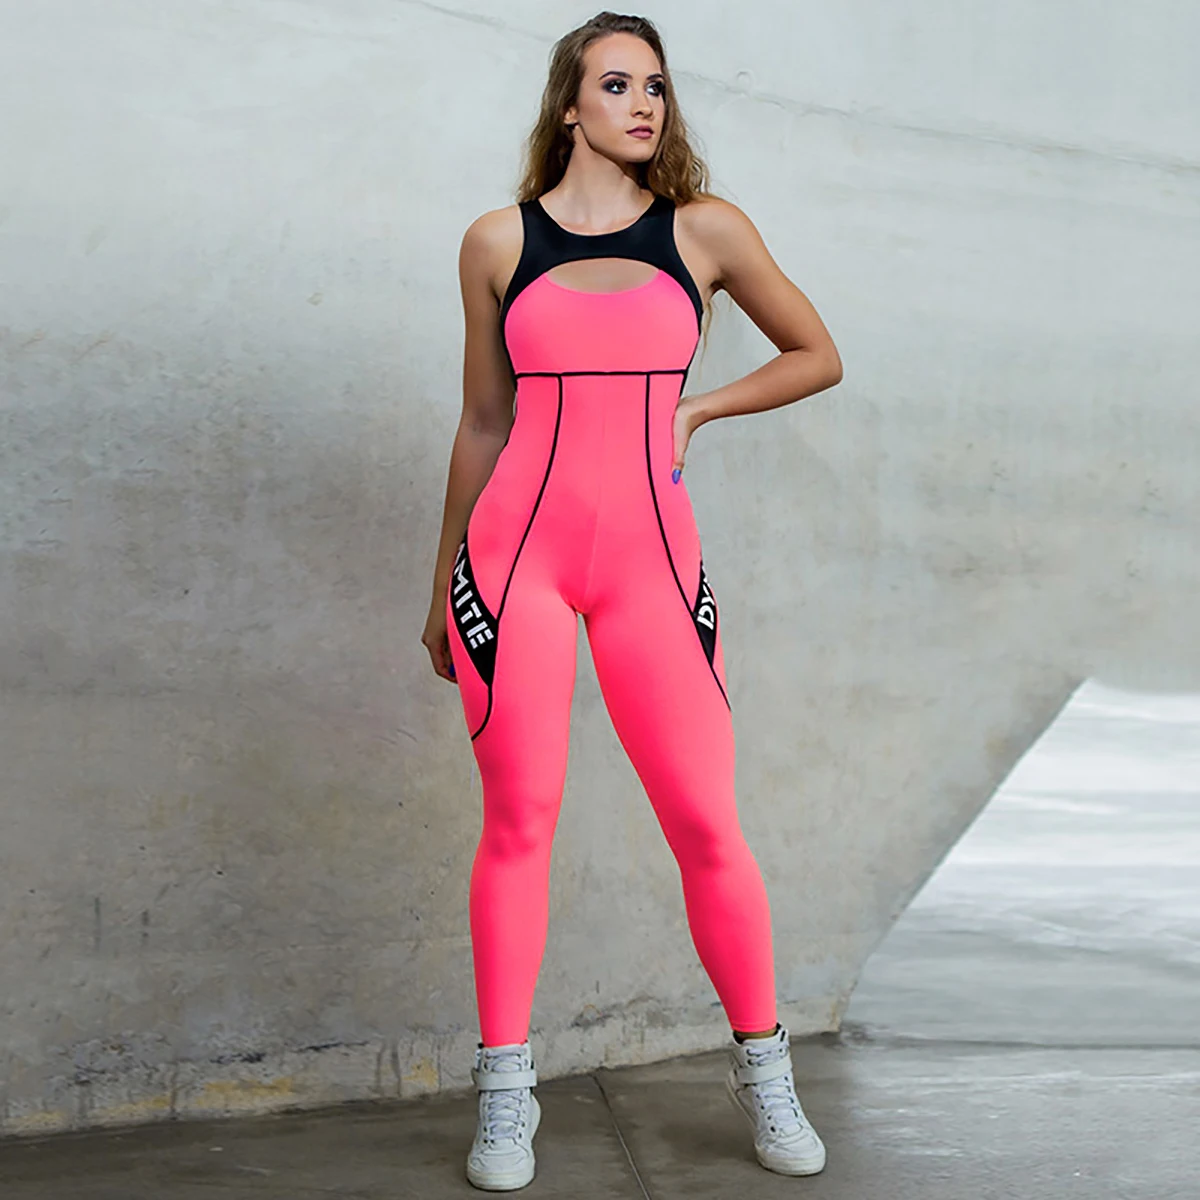 

Oshoplive Female Backless Sexy Pink Jumpsuits Fashion Letter Print Split-Joint Sleeveless Hollowed Sports Jumpsuits For Women